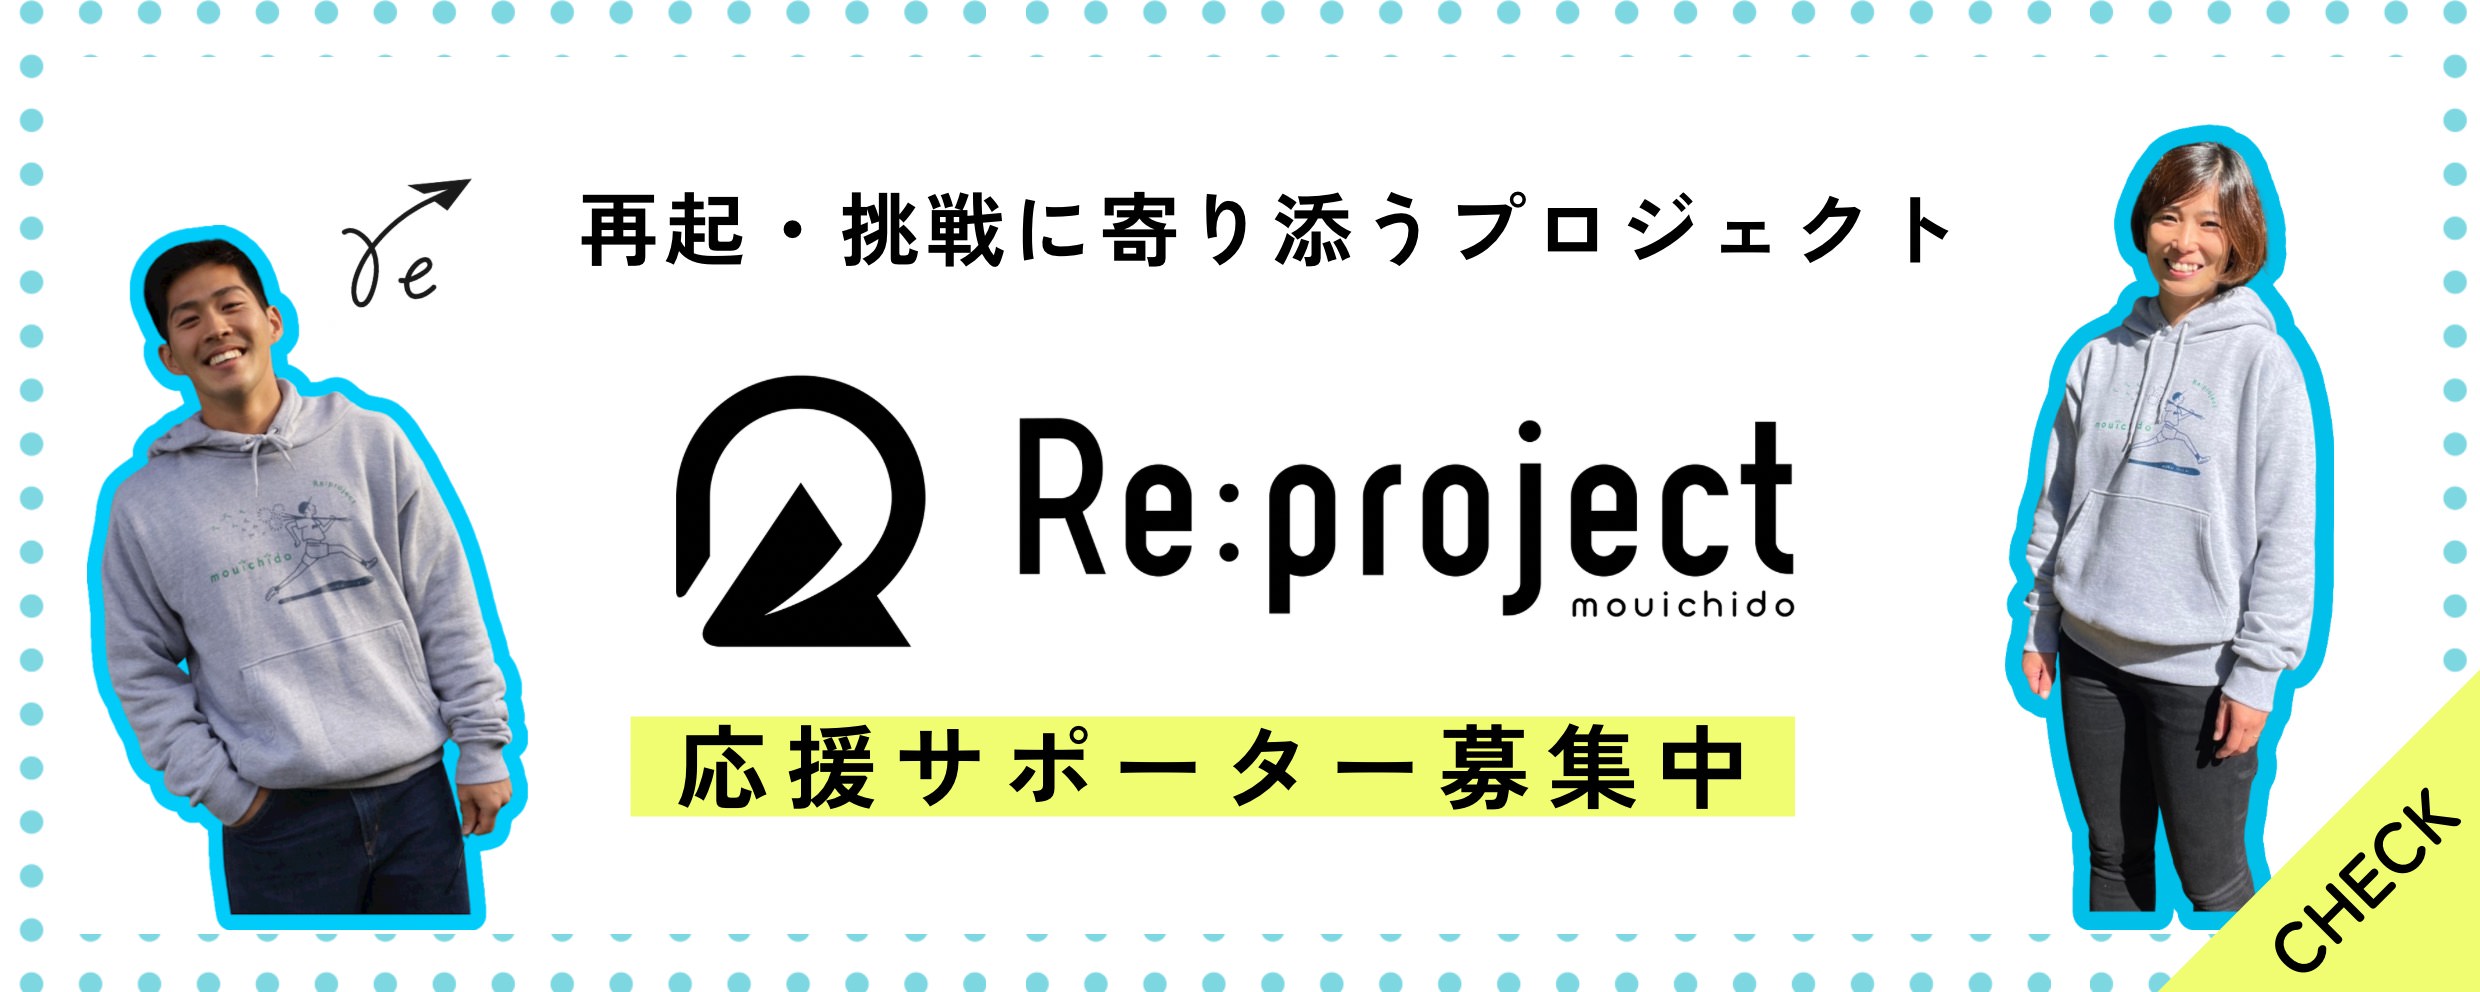 Re:project応援サポーター募集